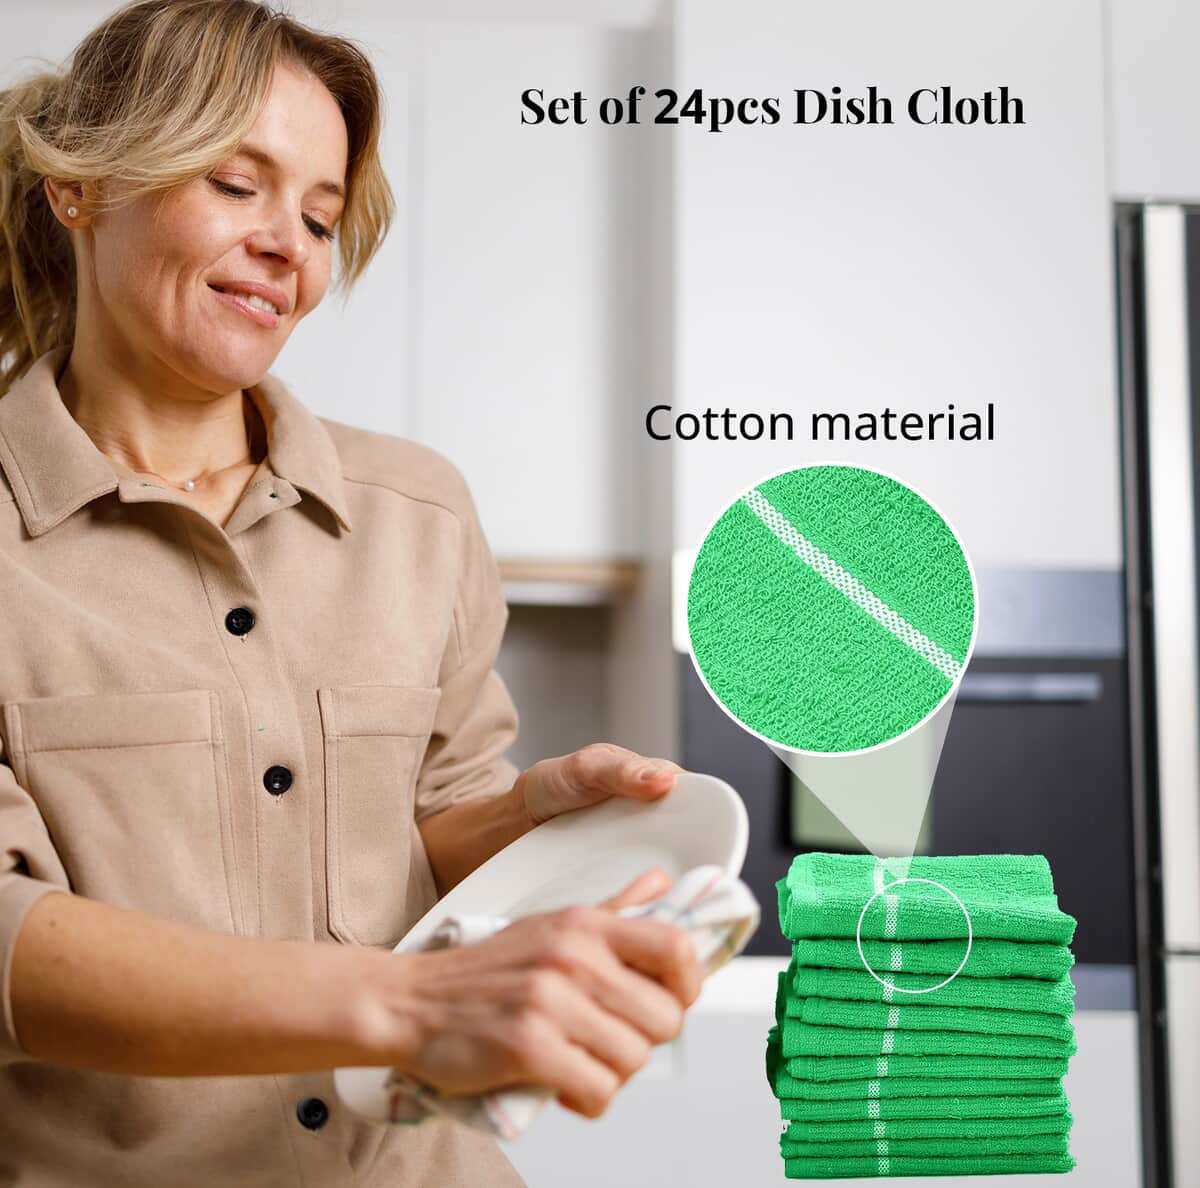 Set of 24pcs Cotton Dish Scrubbing Cleaning Cloth - Green image number 2